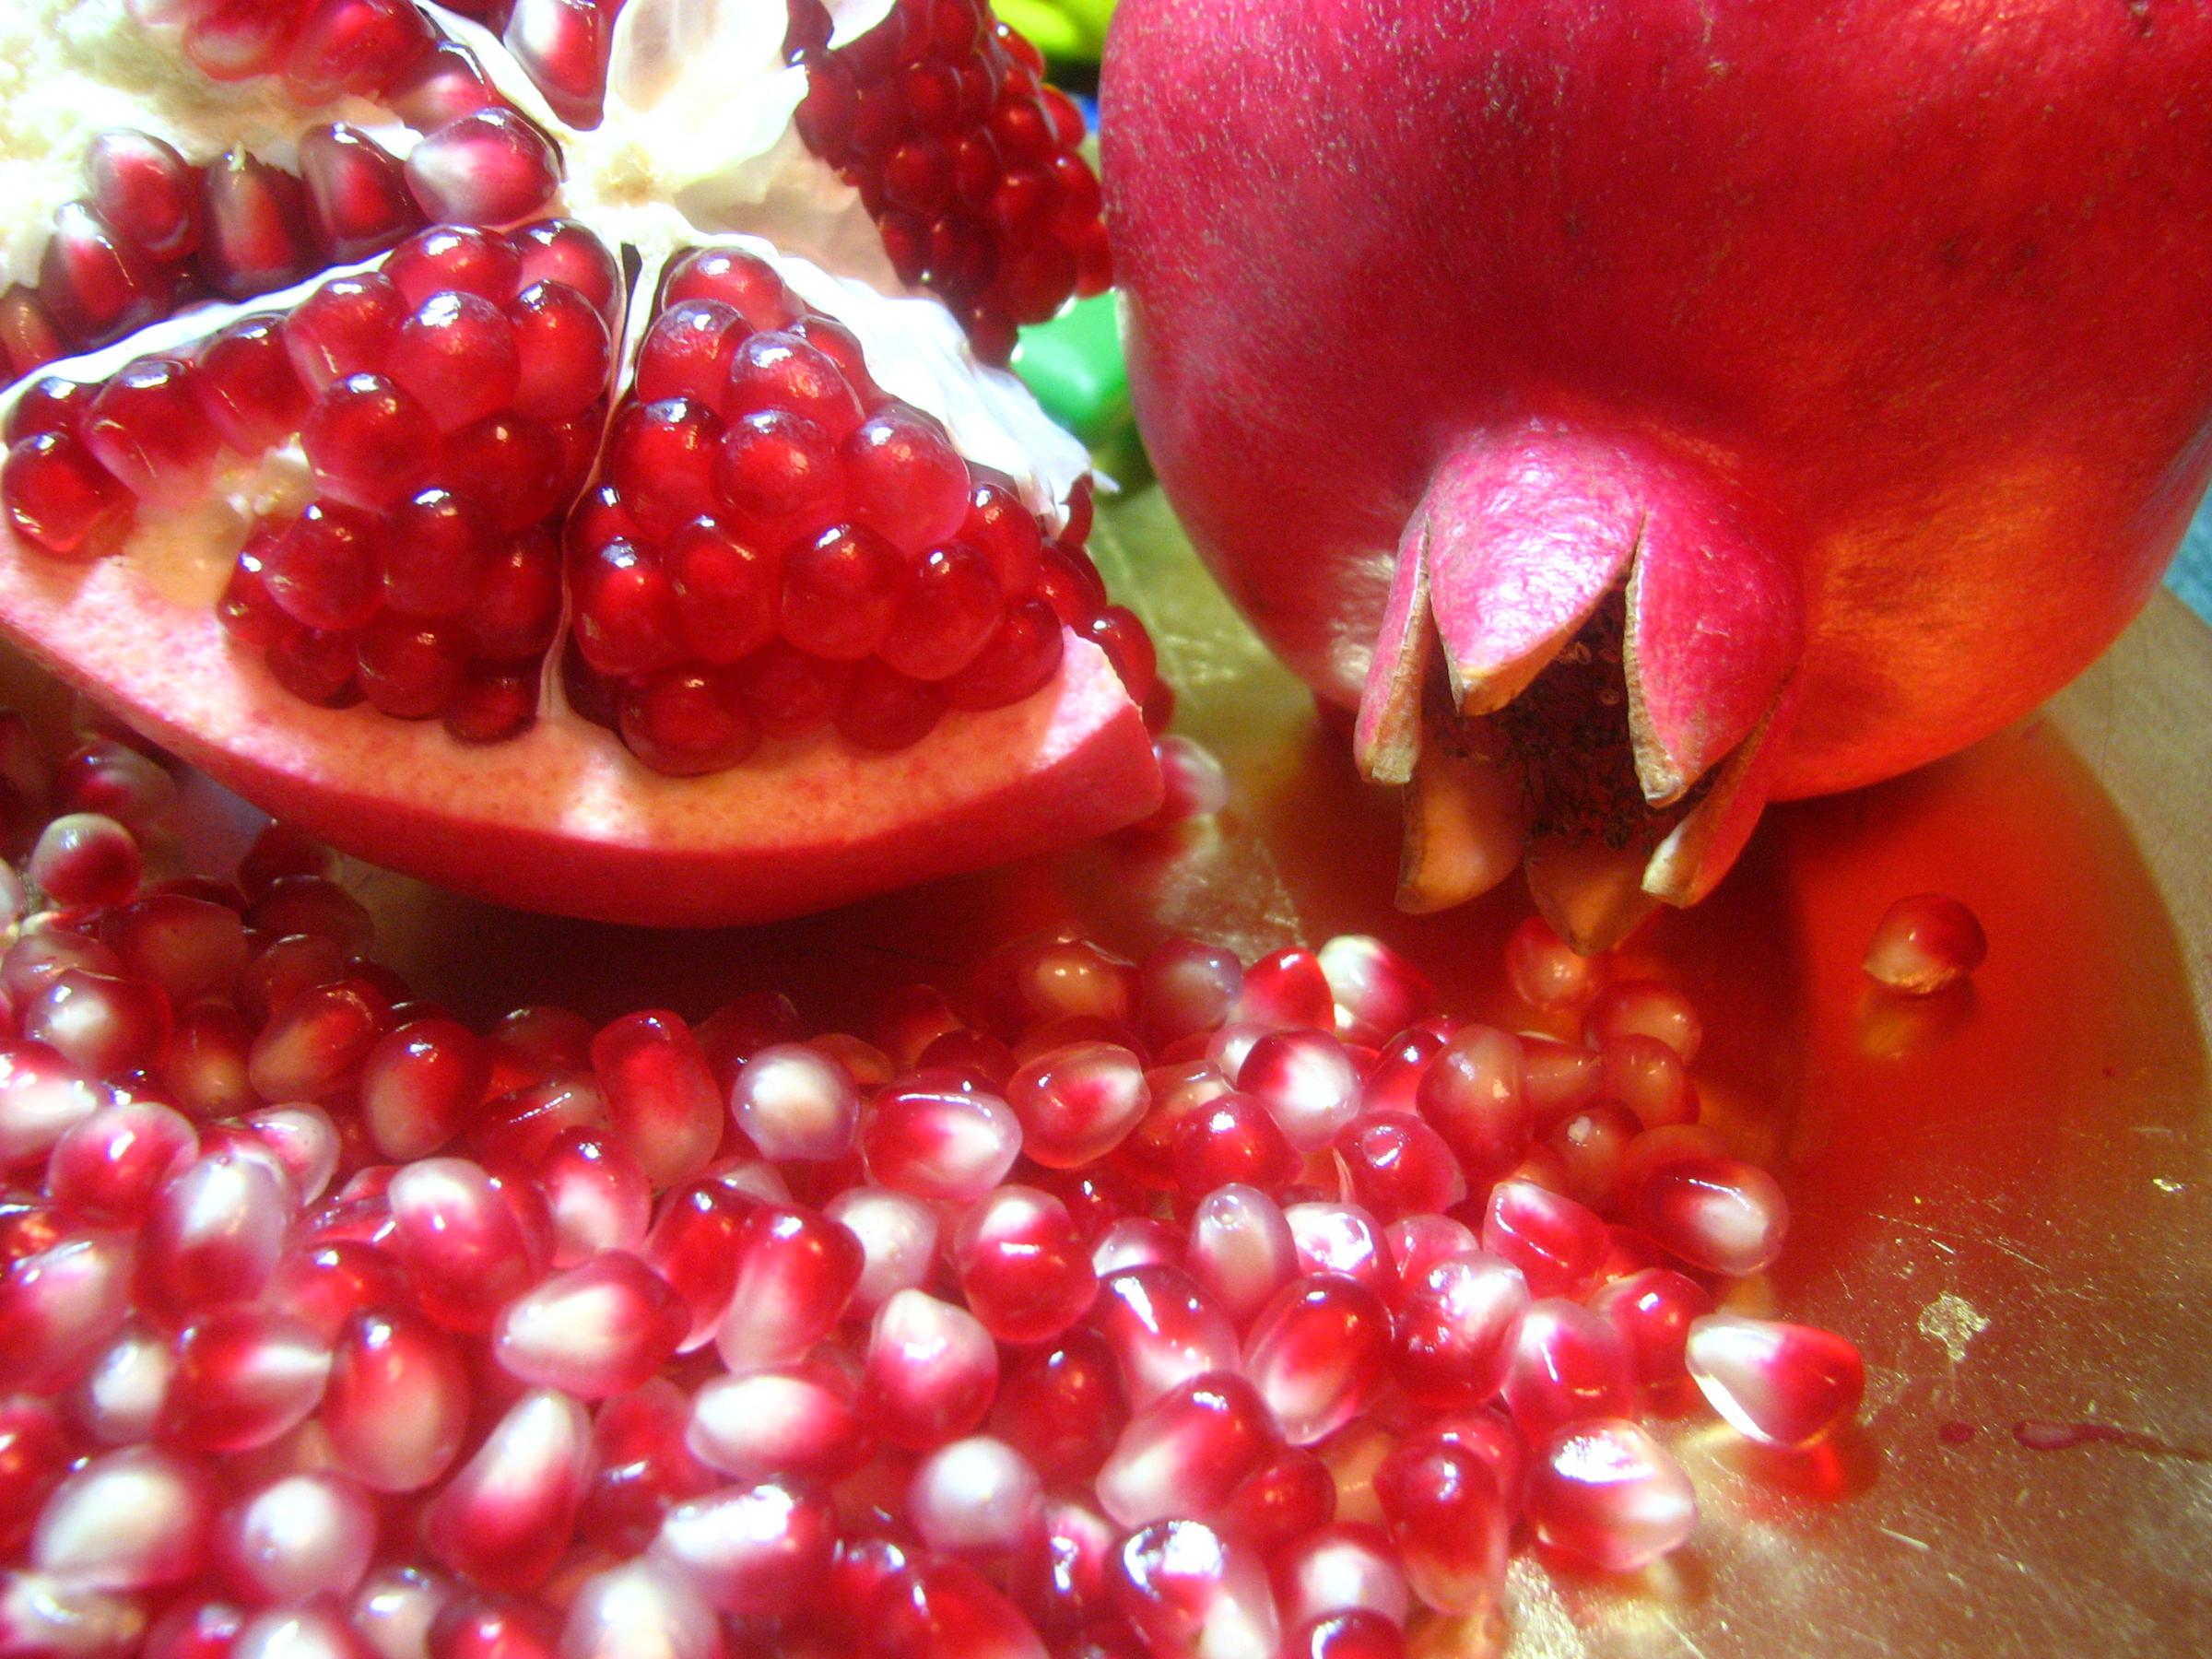 HD wallpaper Fruits Pomegranate Free Images  Wallpaper Flare